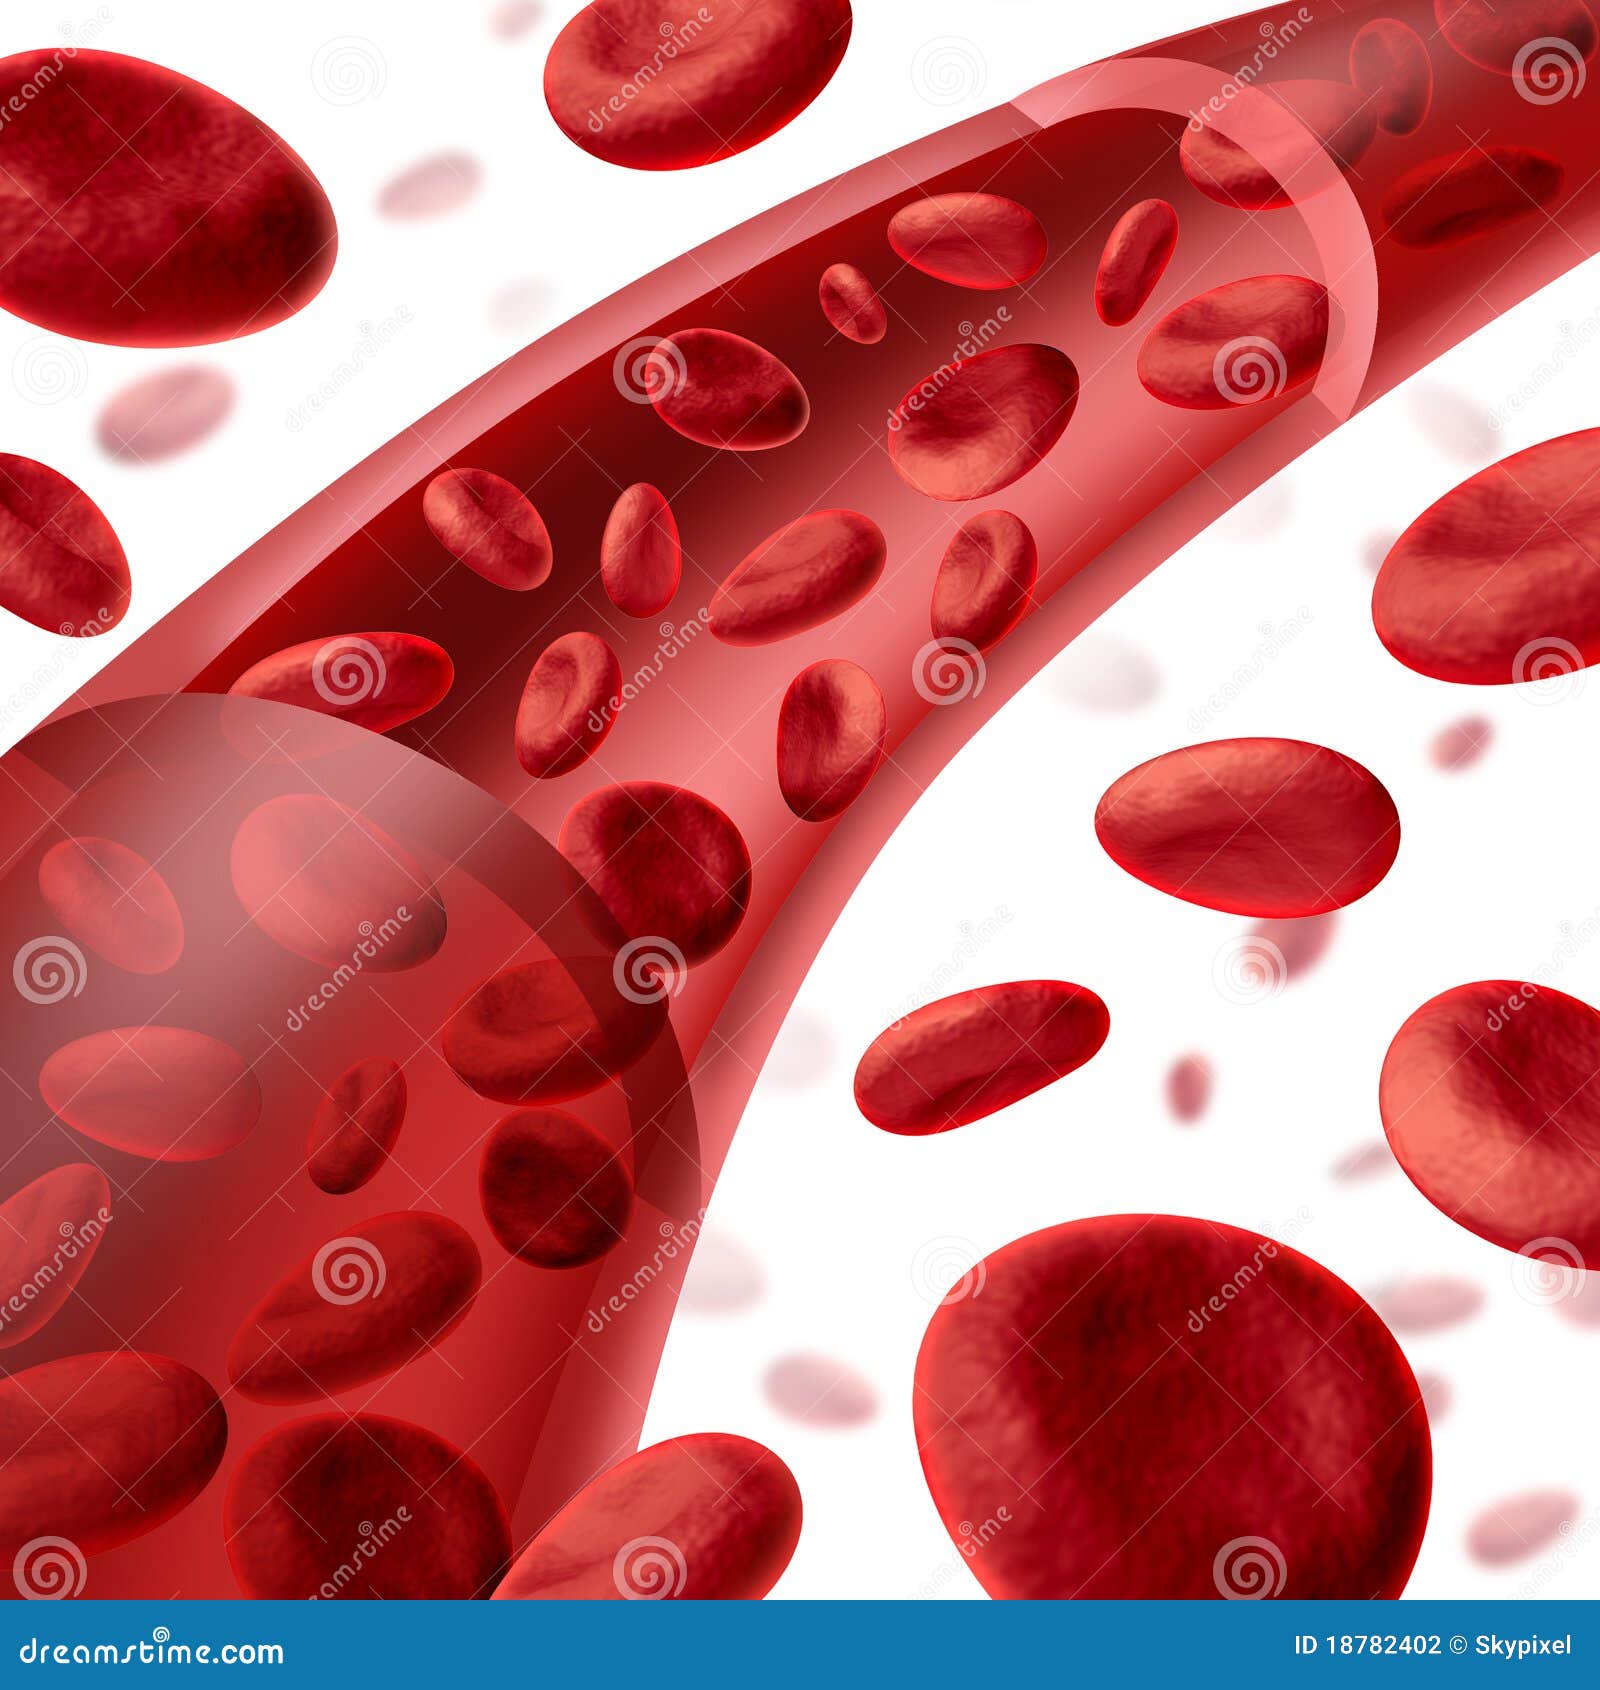 clipart red blood cell - photo #36